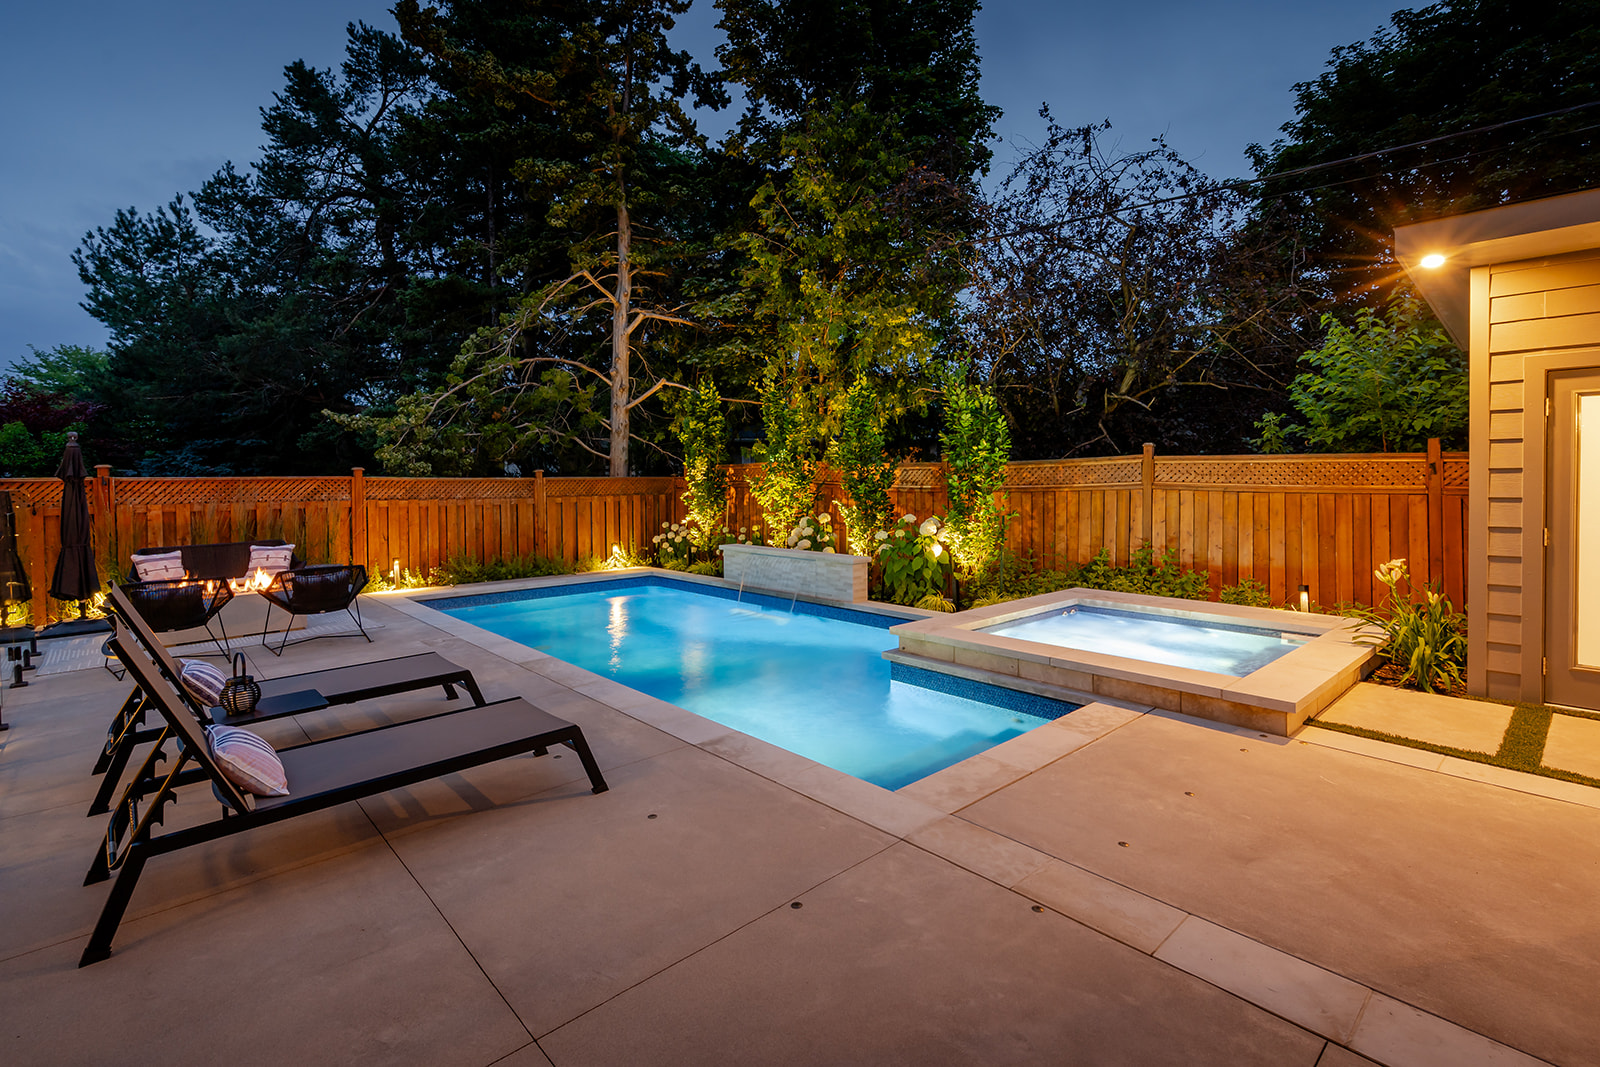 An inground pool with a jacuzzi and lights on.